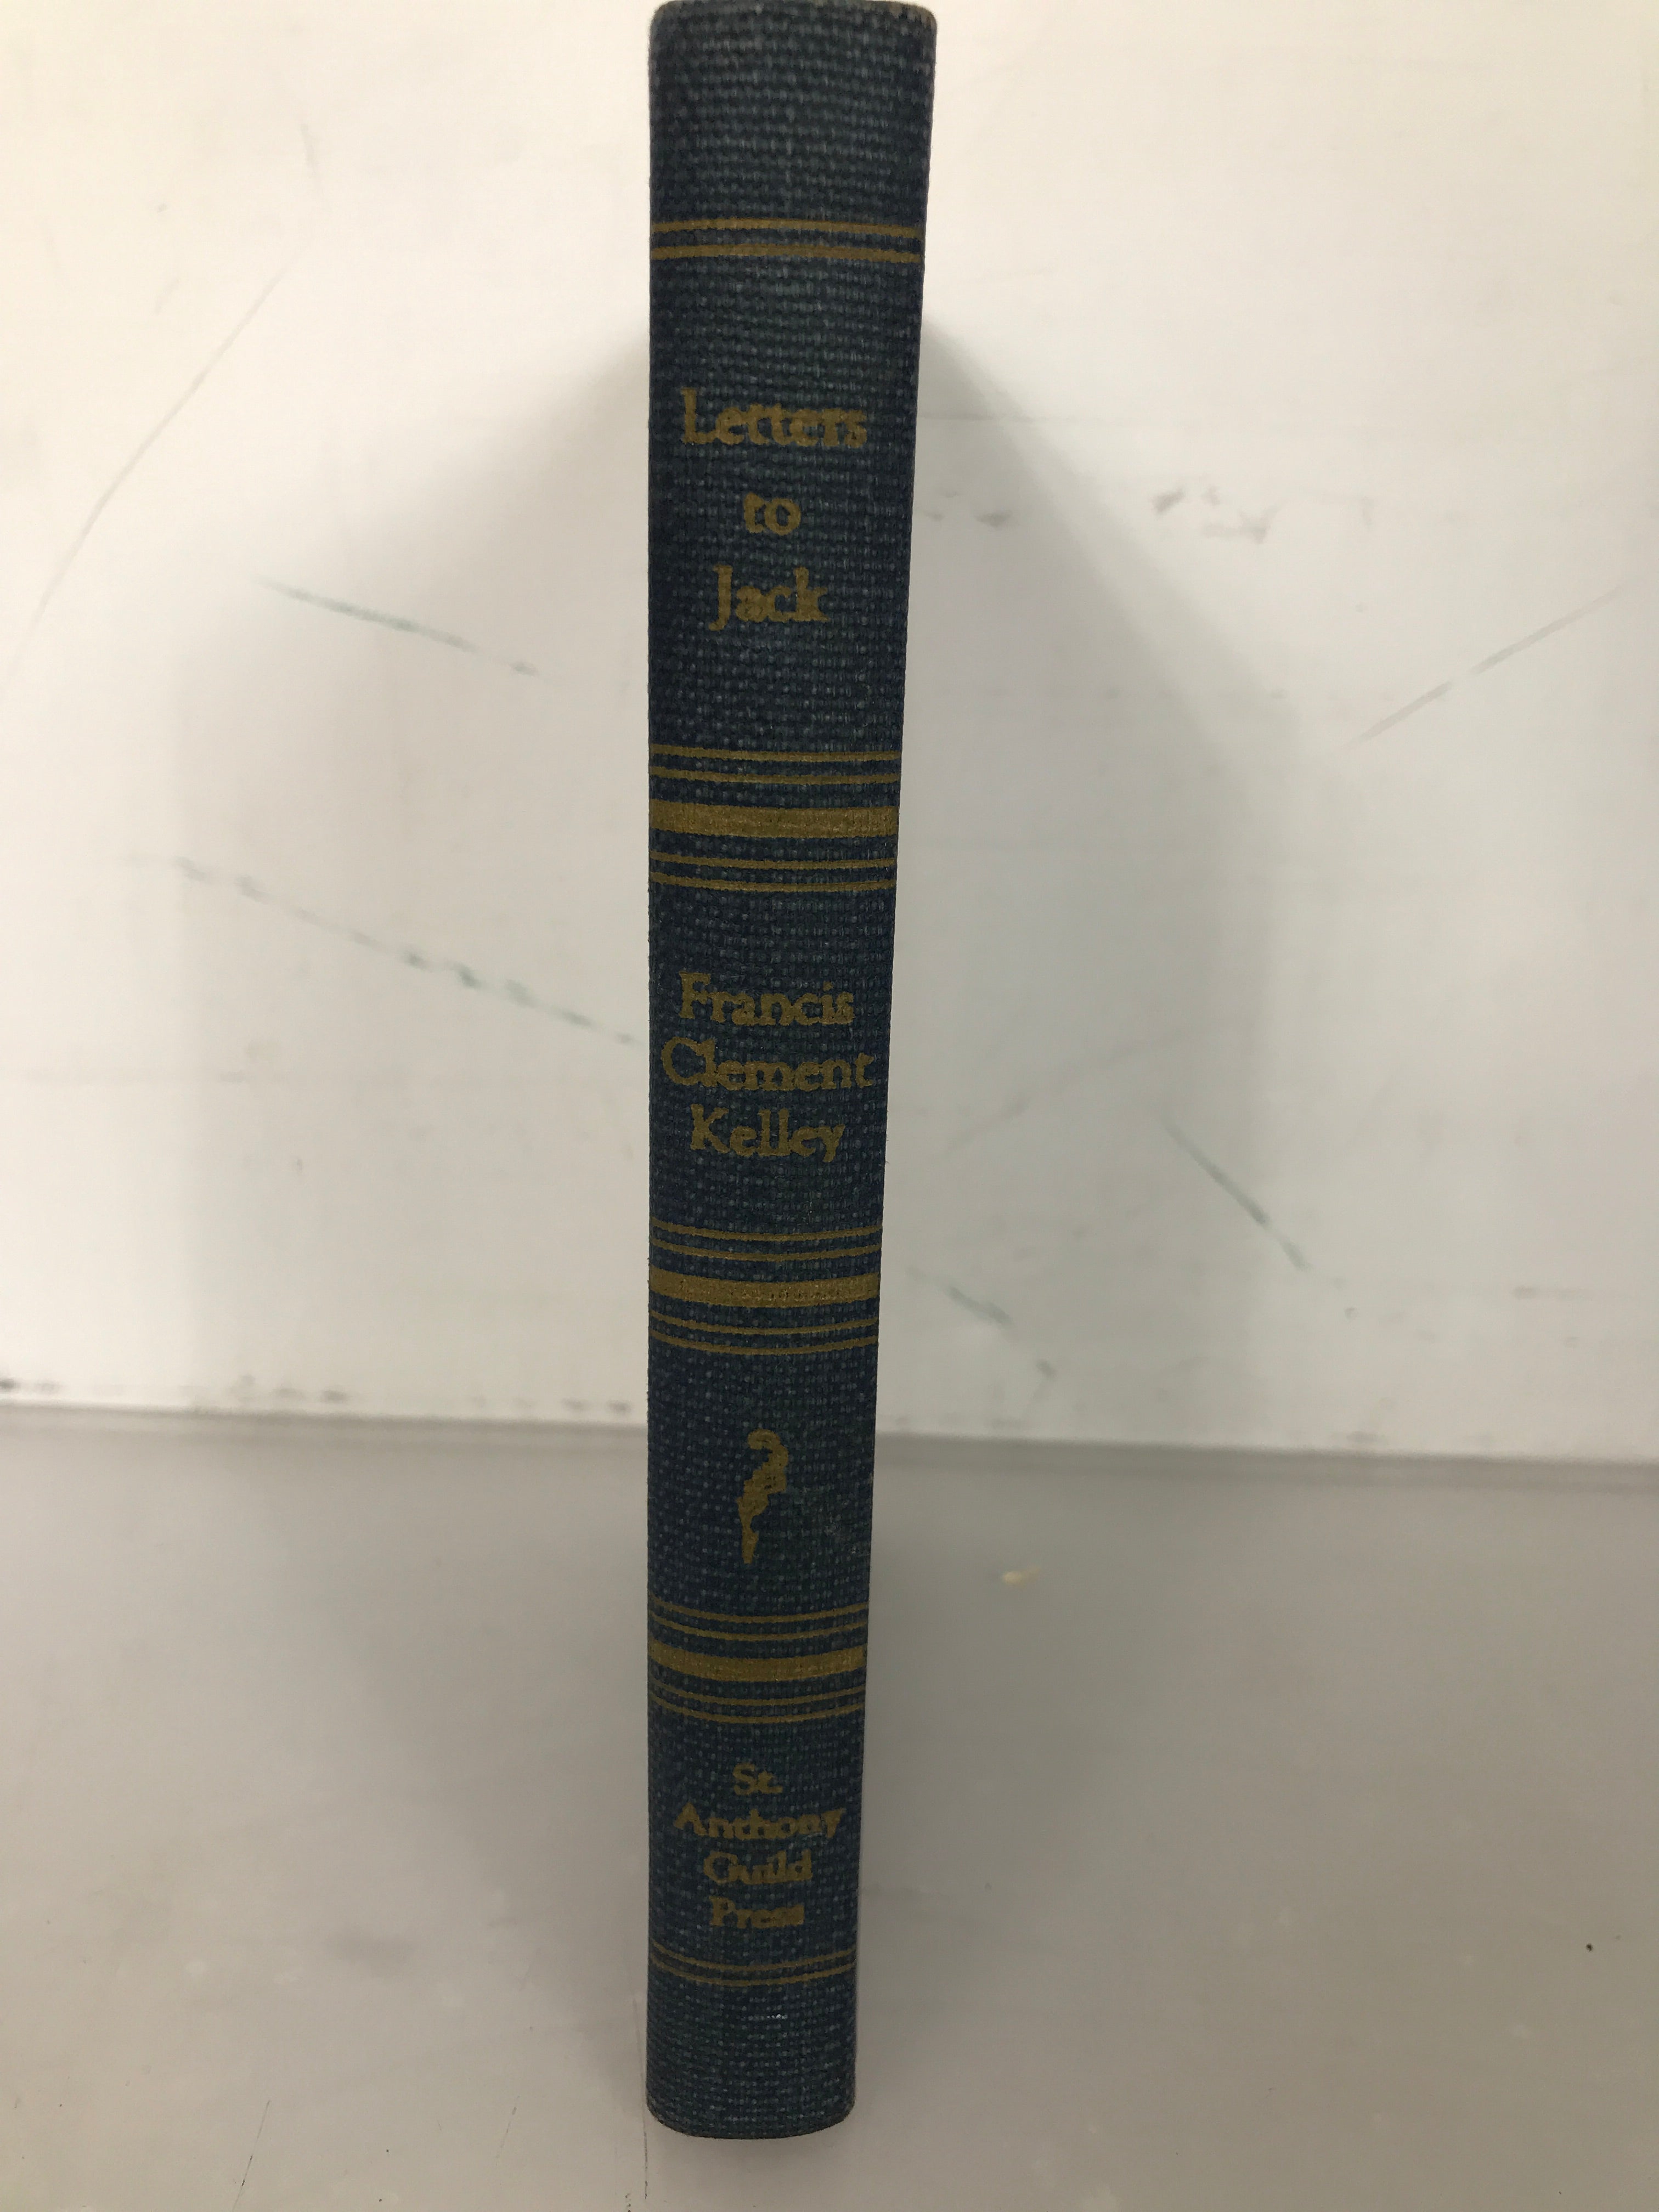 Letters to Jack (1947) Third Printing HC